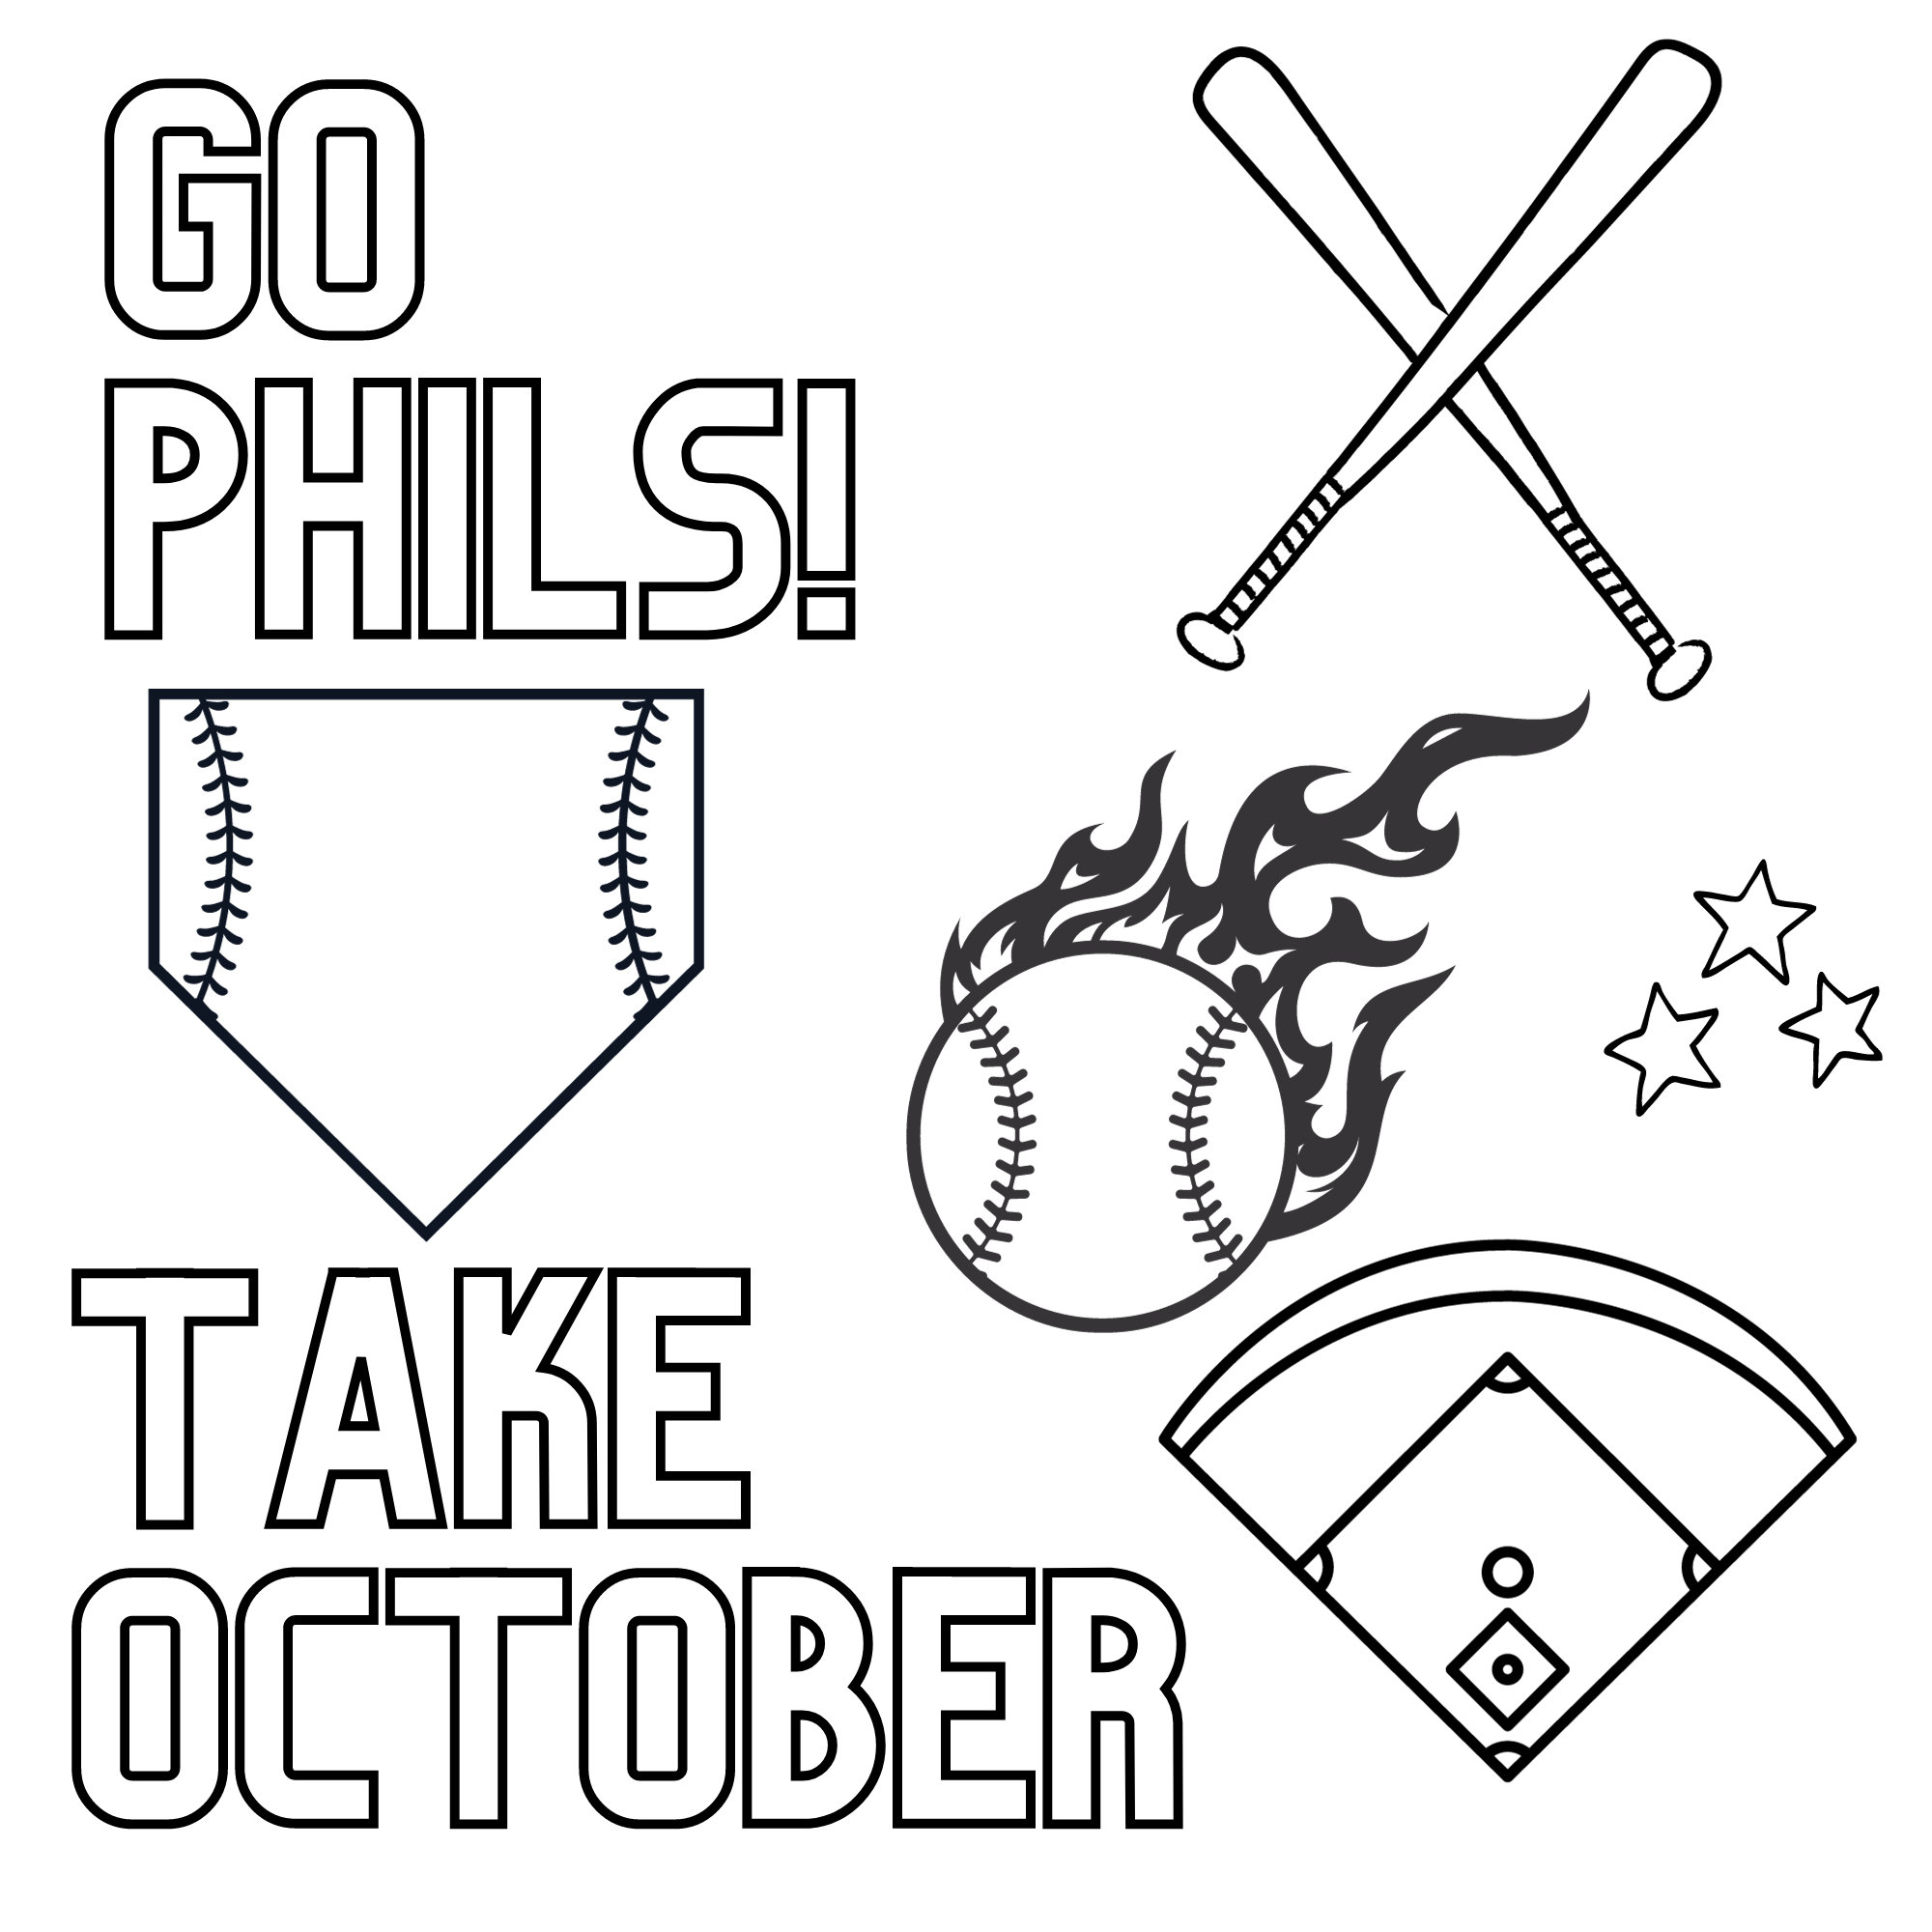 Go phils take october phillies kids printable coloring page